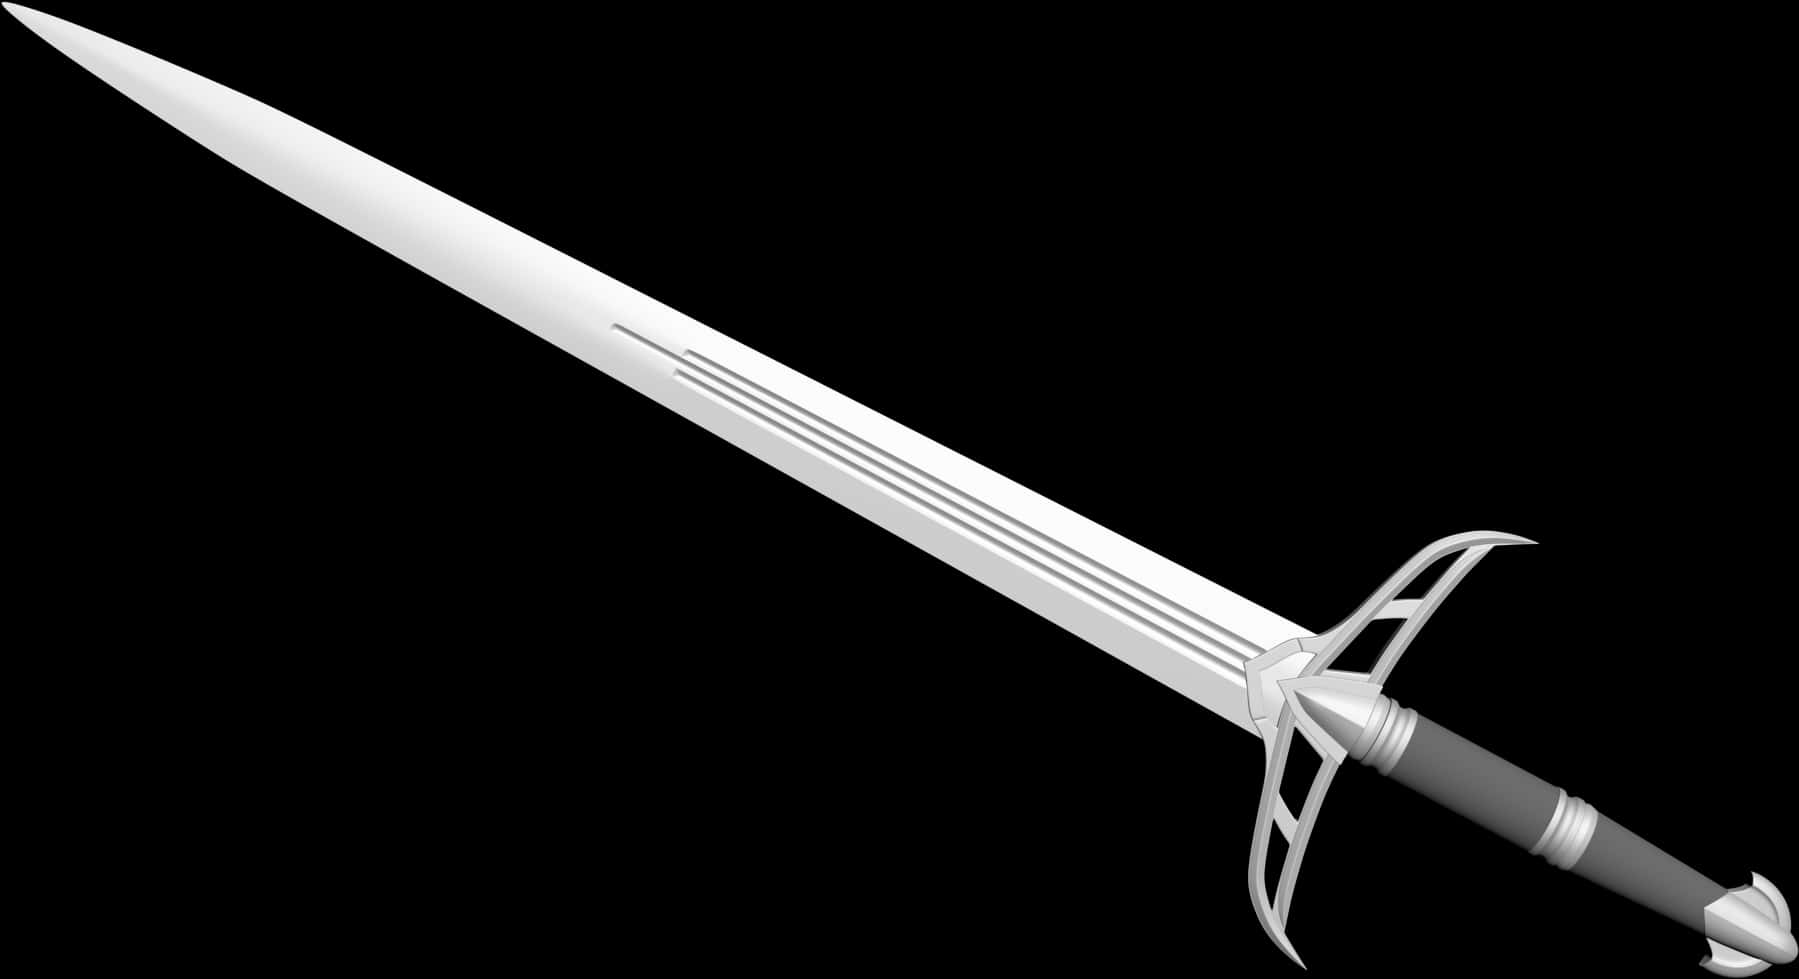 A White Sword With A Silver Handle